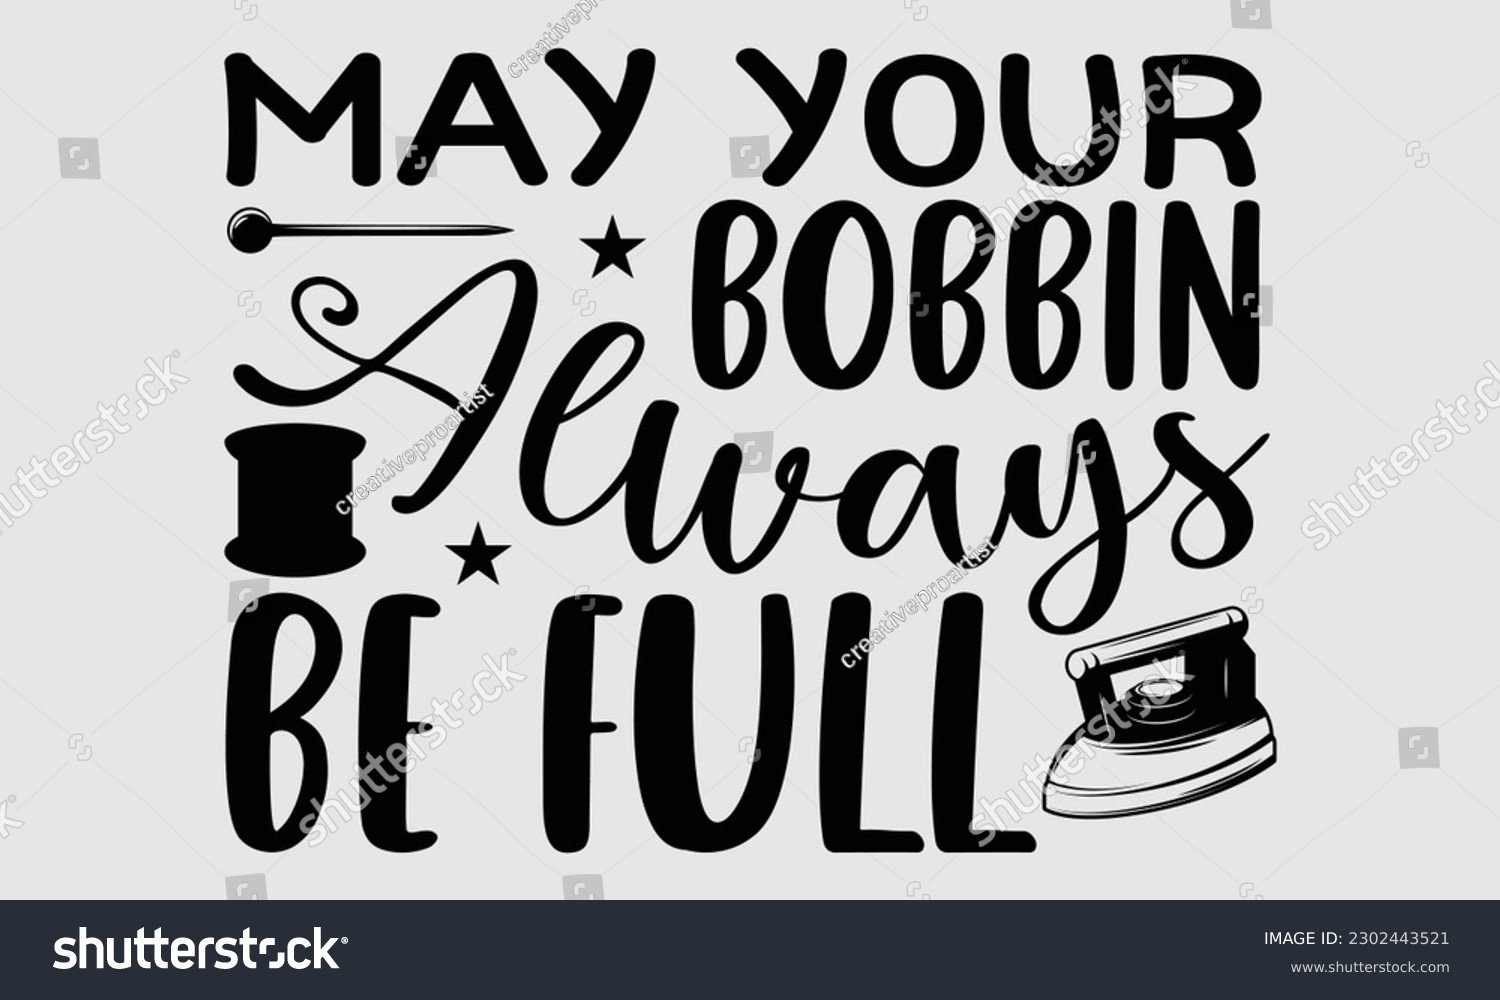 SVG of May your bobbin always be full- Sewing t- shirt design, Hand drawn vintage illustration for prints on eps, svg Files for Cutting, greeting card template with typography text svg